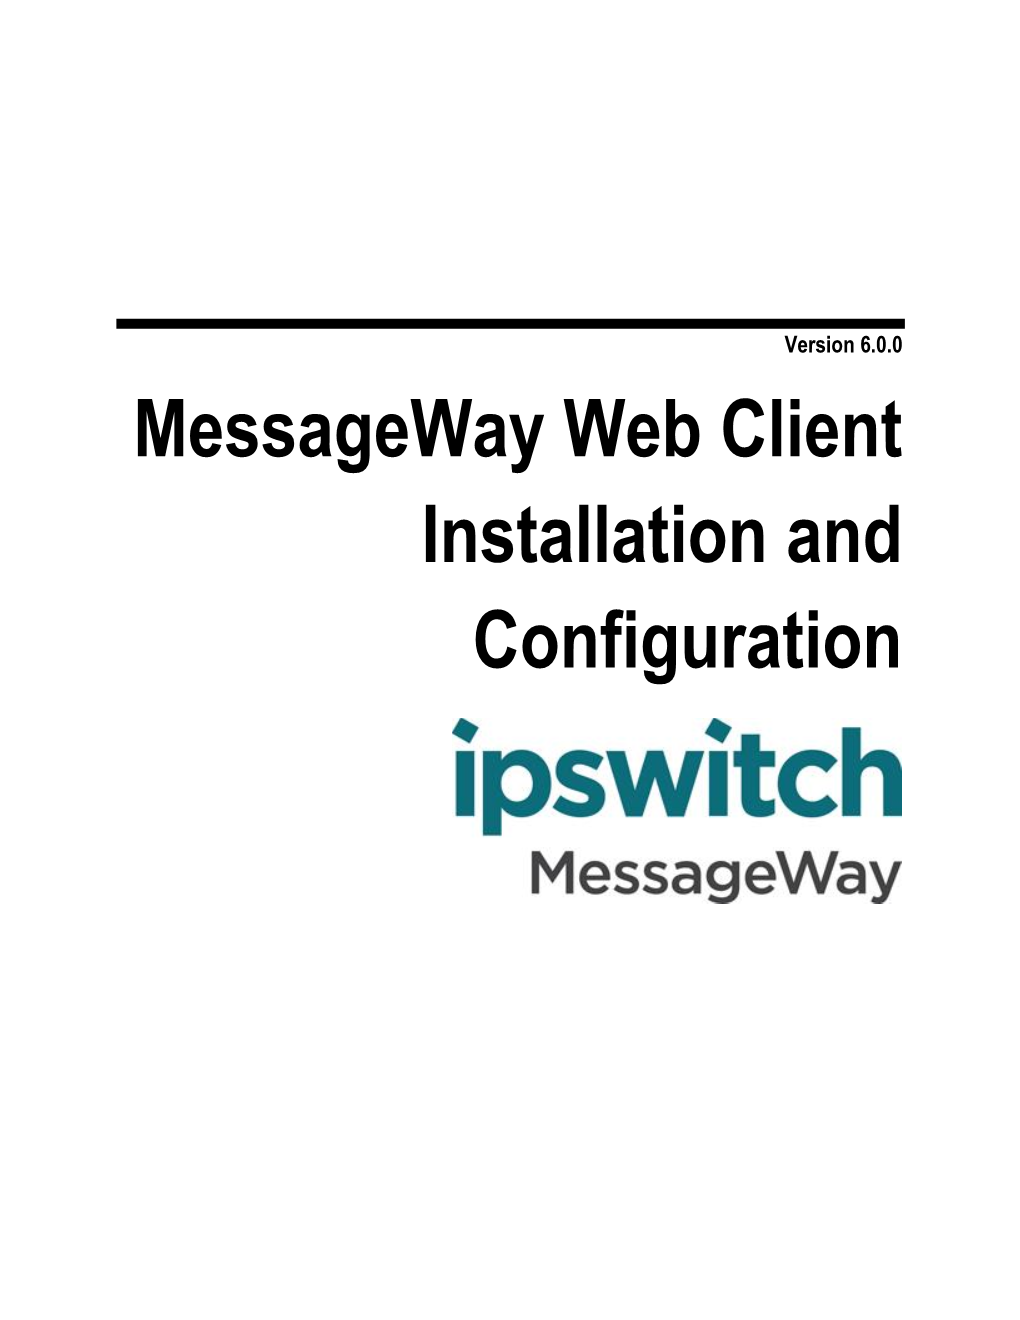 Messageway Web Client Installation and Configuration